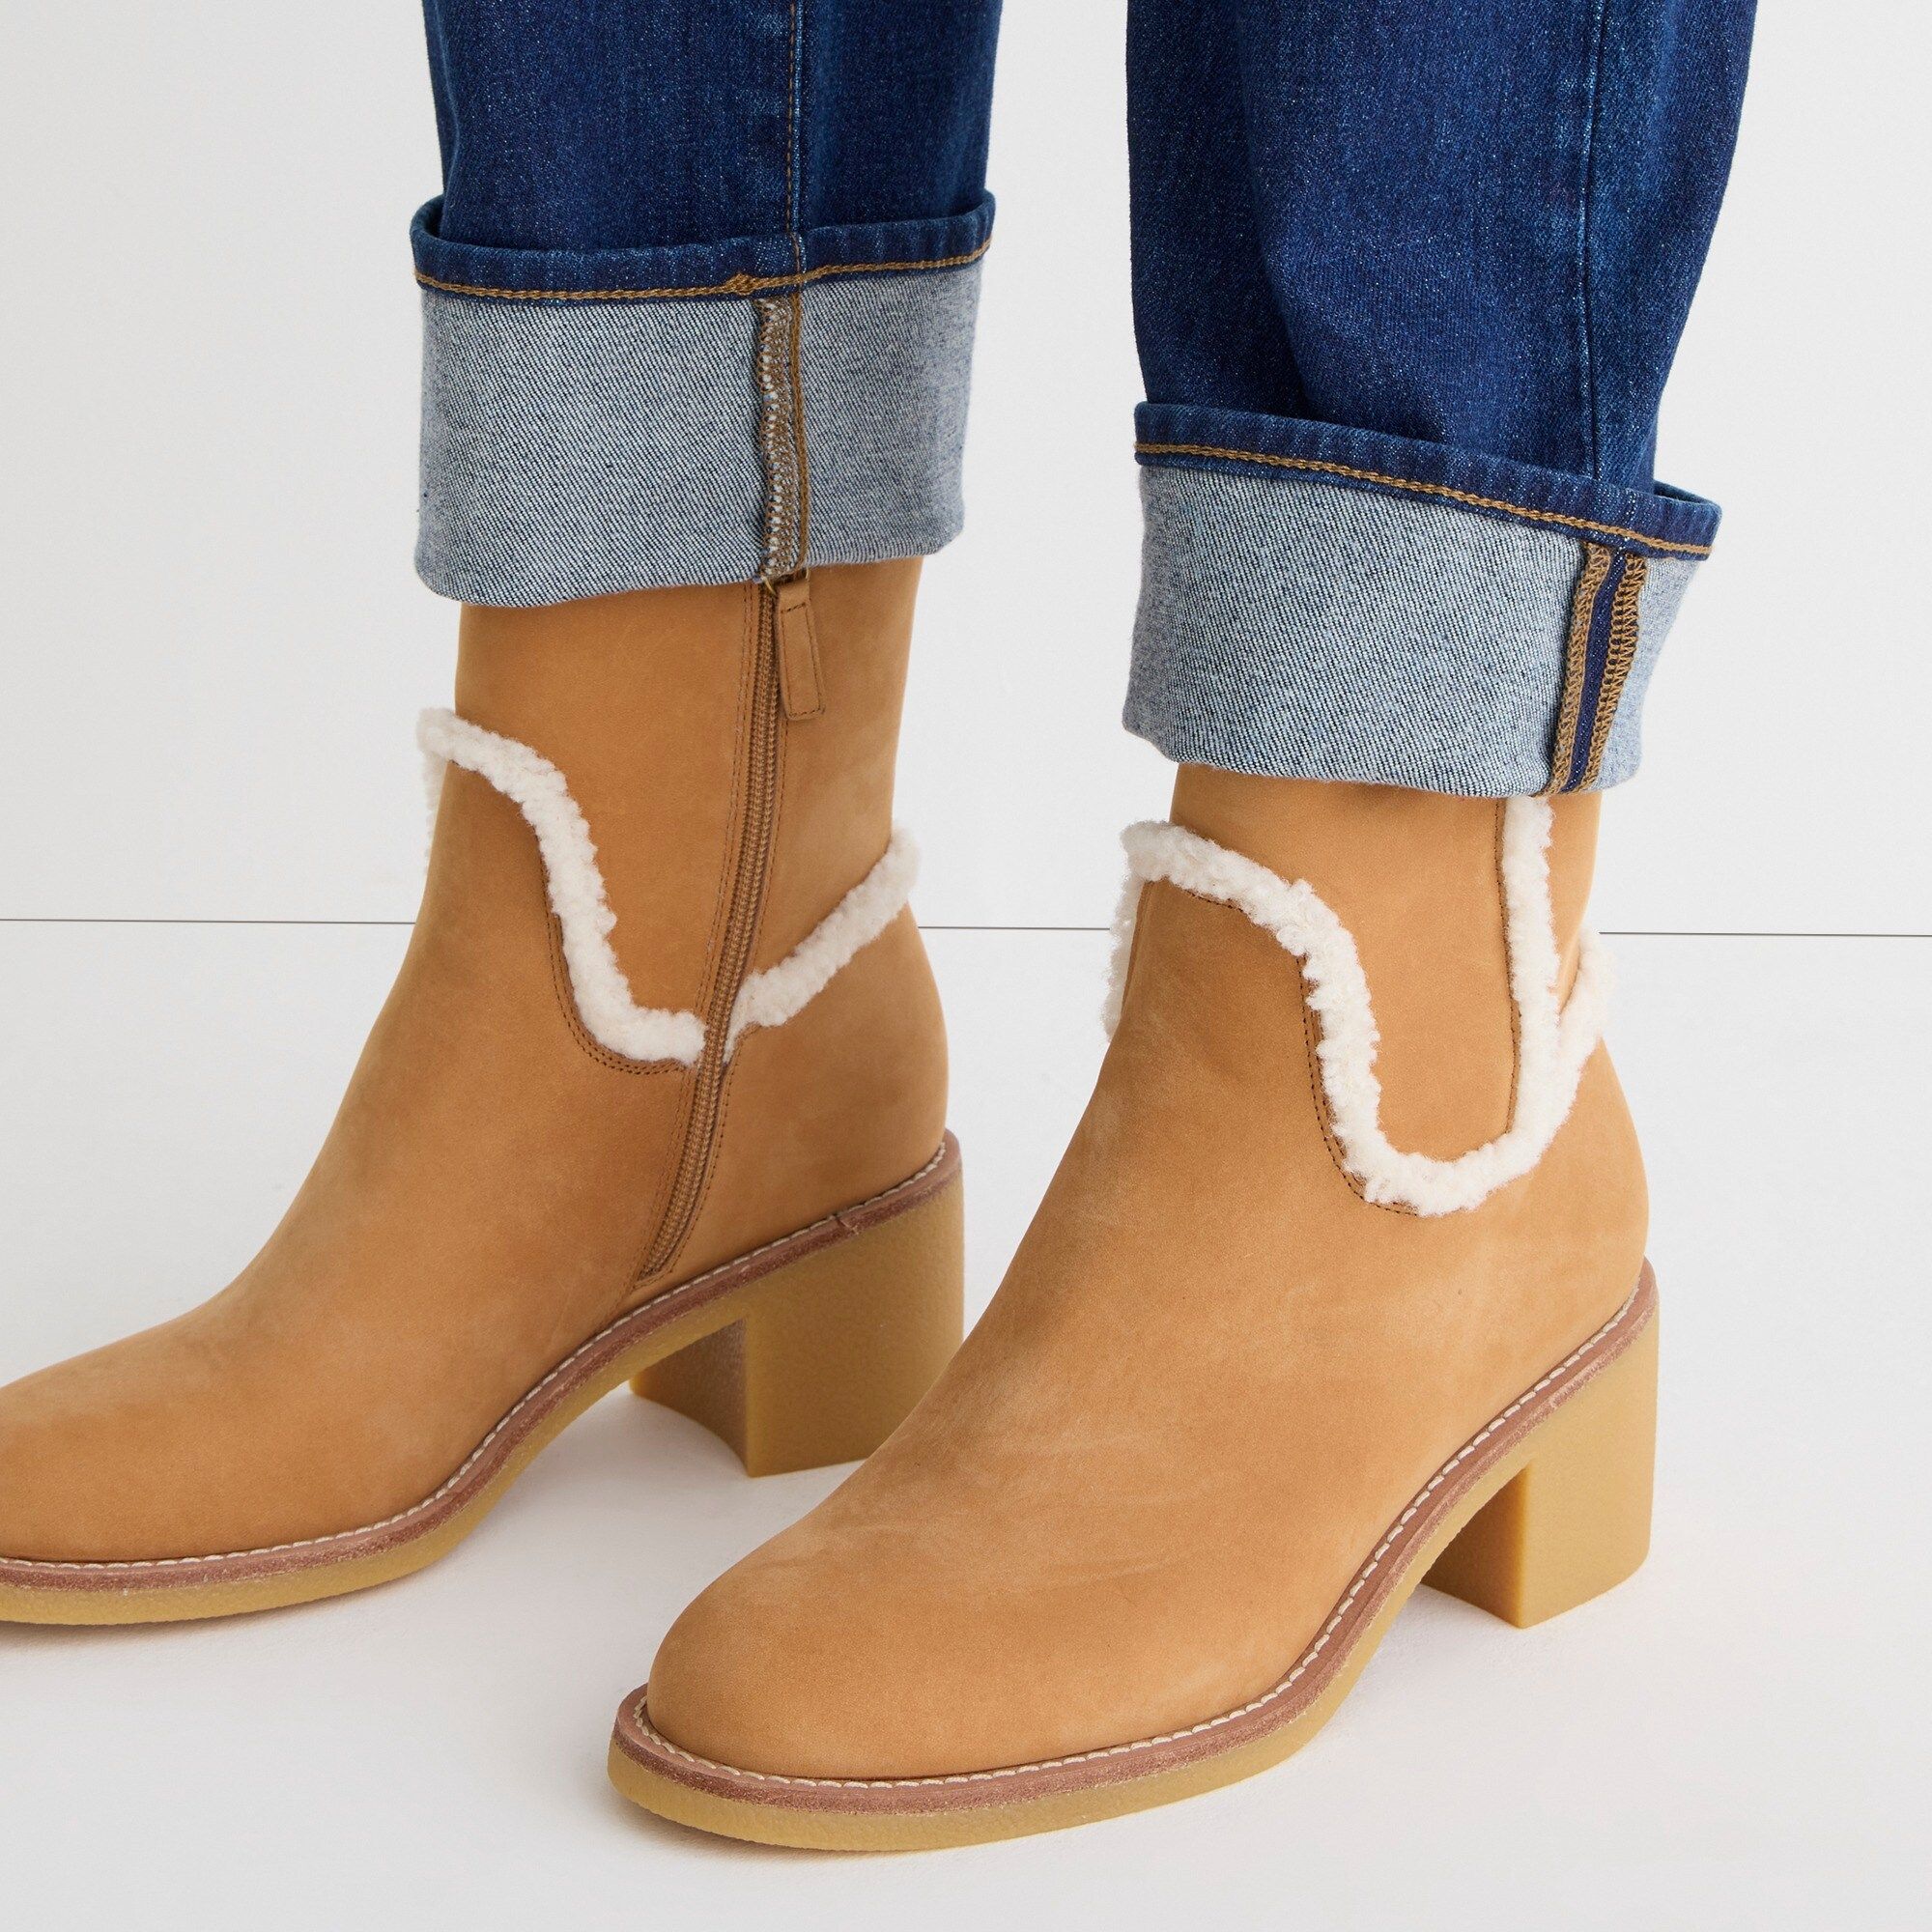 Shearling stacked heels in suede | J.Crew US